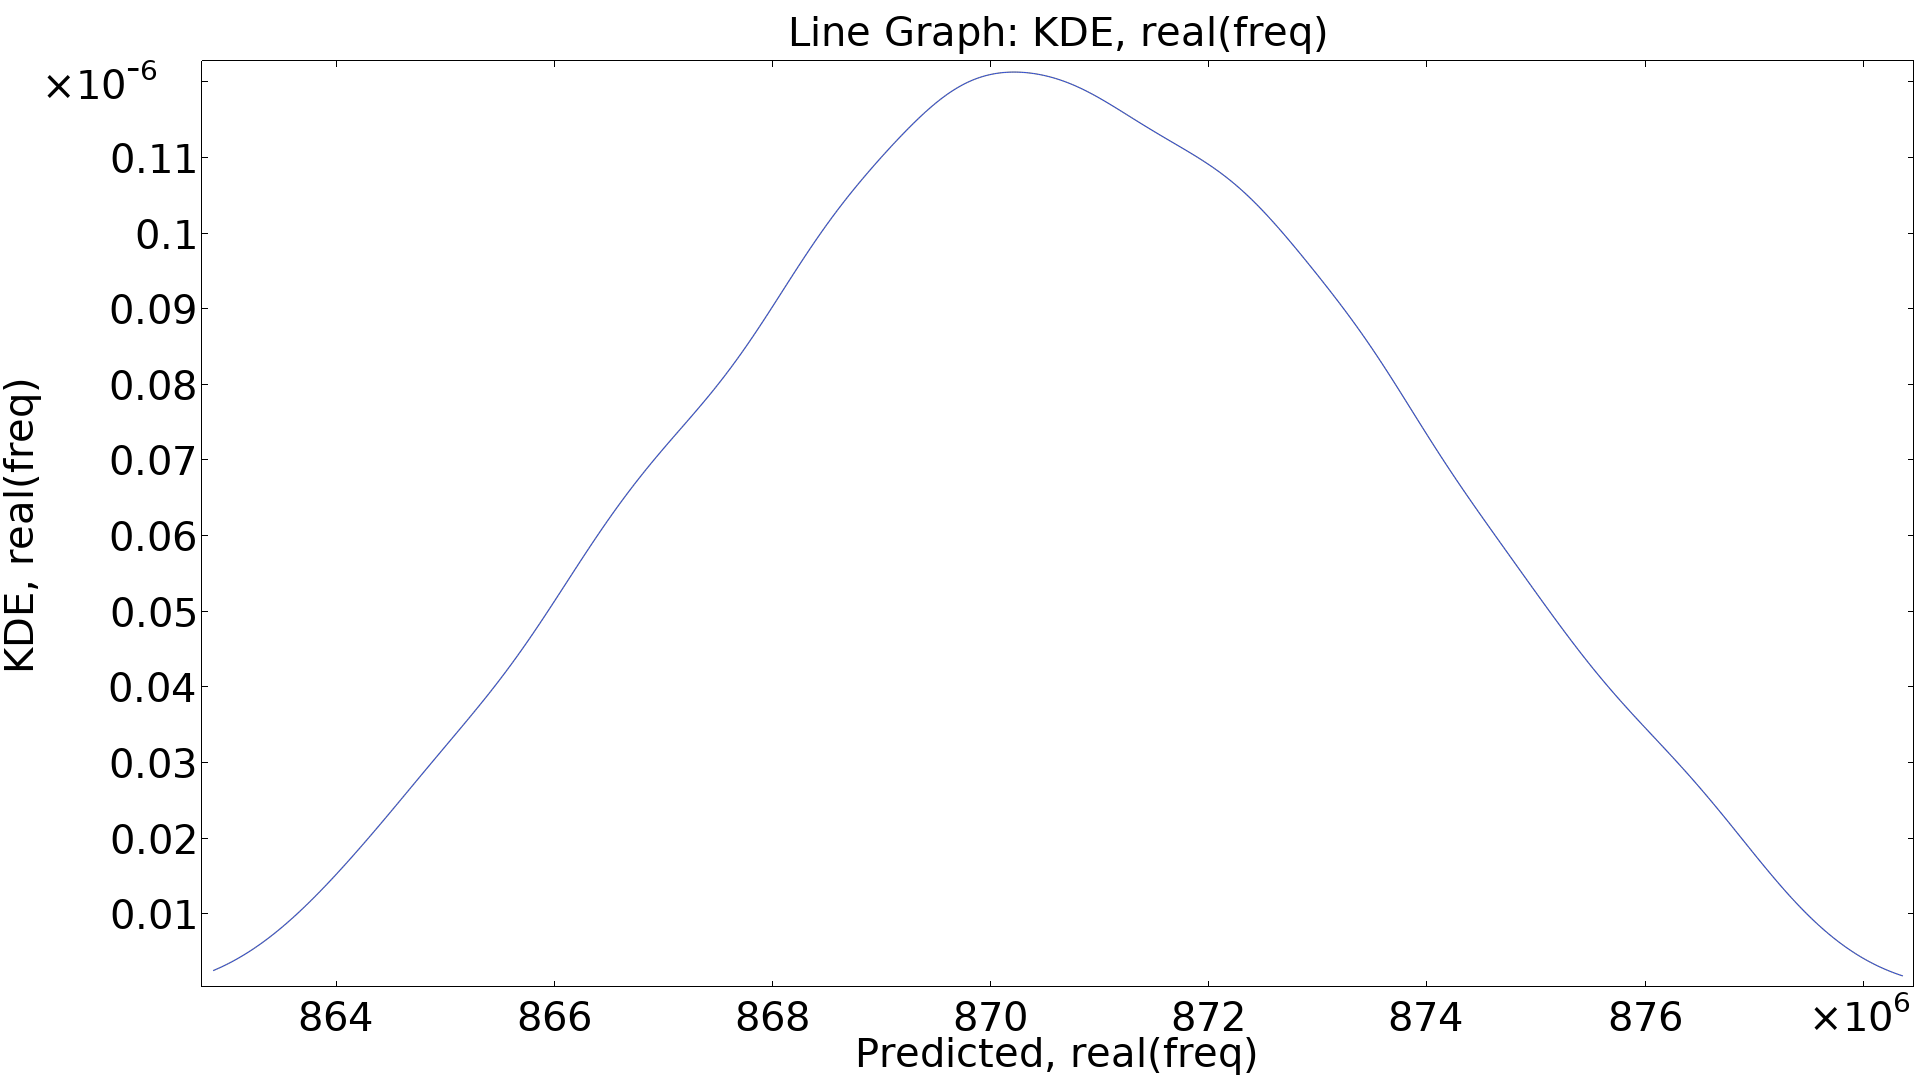 A 1D plot with a line, with the resonant frequency on the x-axis and kernel density estimation on the y-axis.